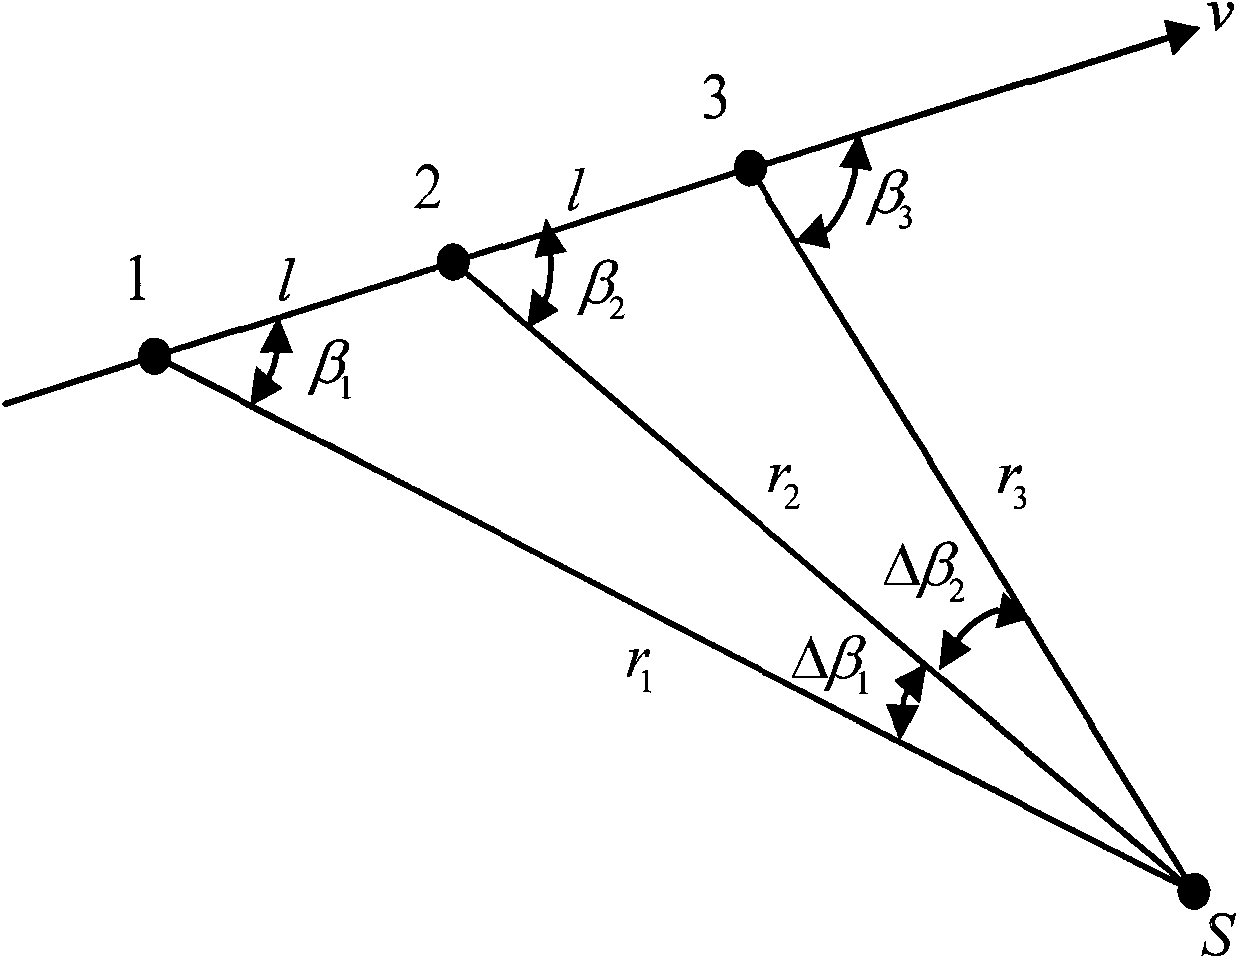 Method for rapidly measuring speed of flying target by fixed single station